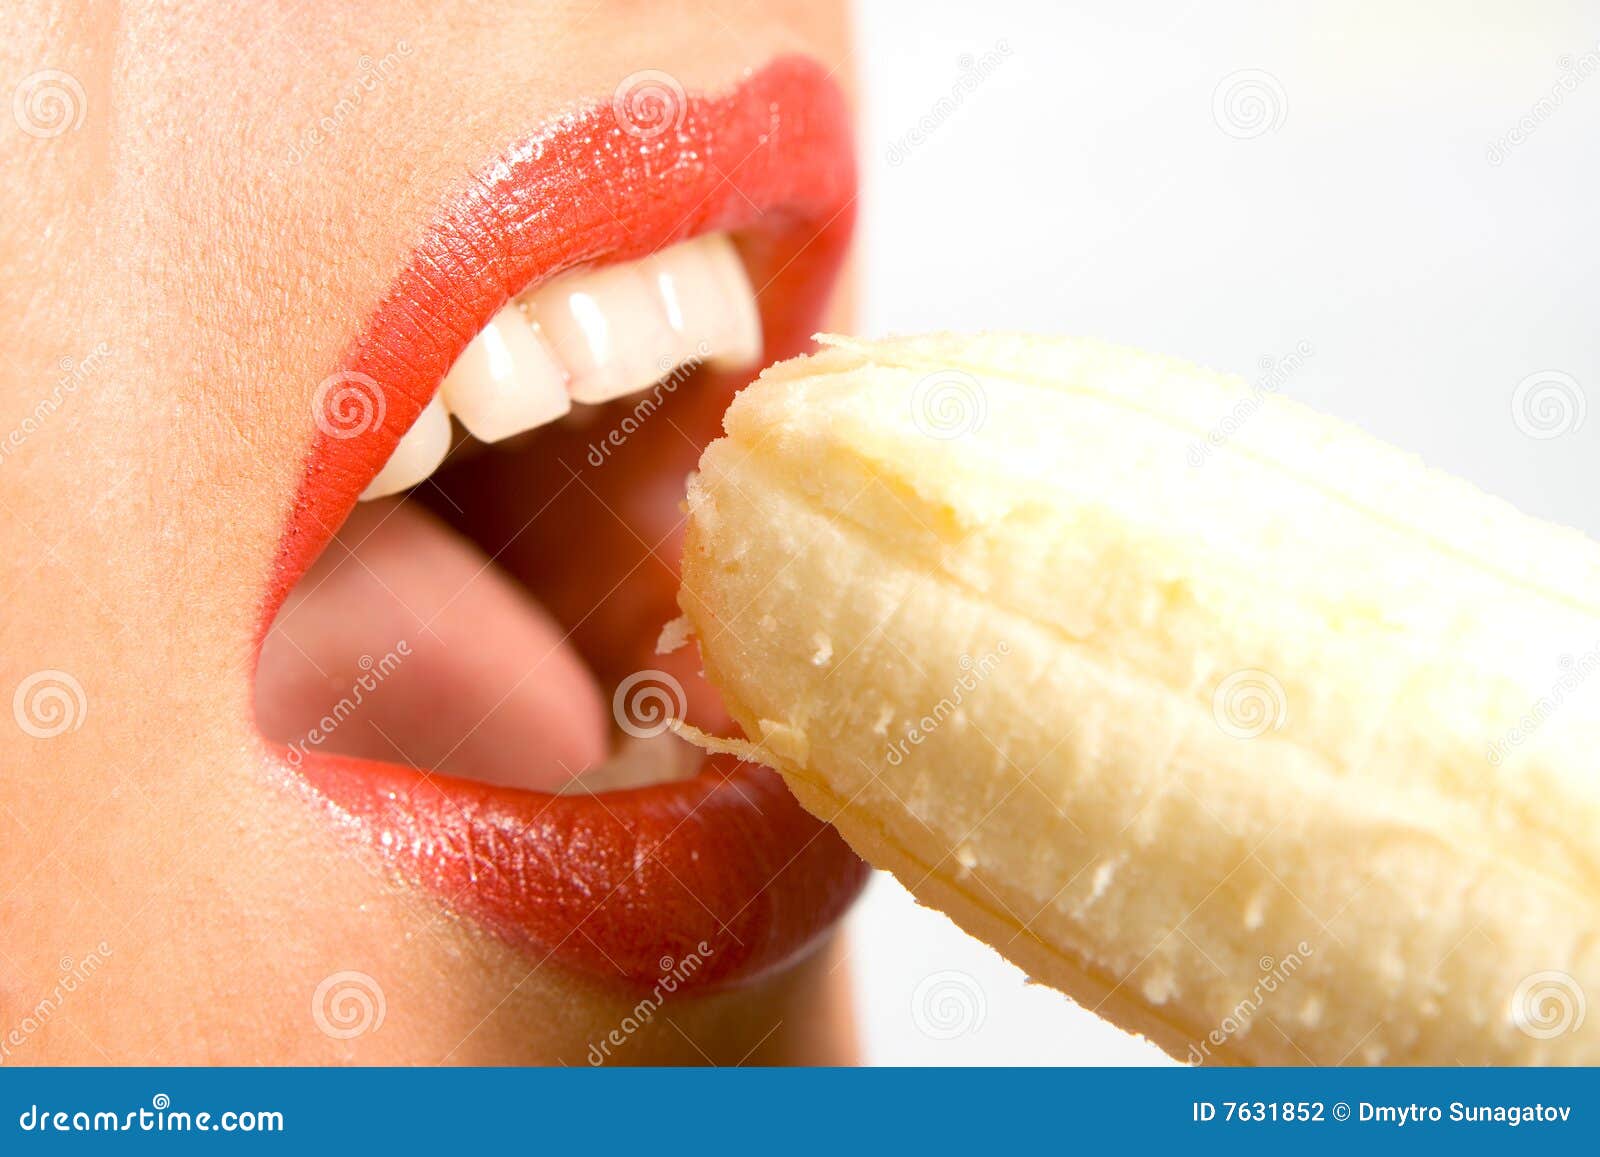 divine being share woman eating banana picture photos